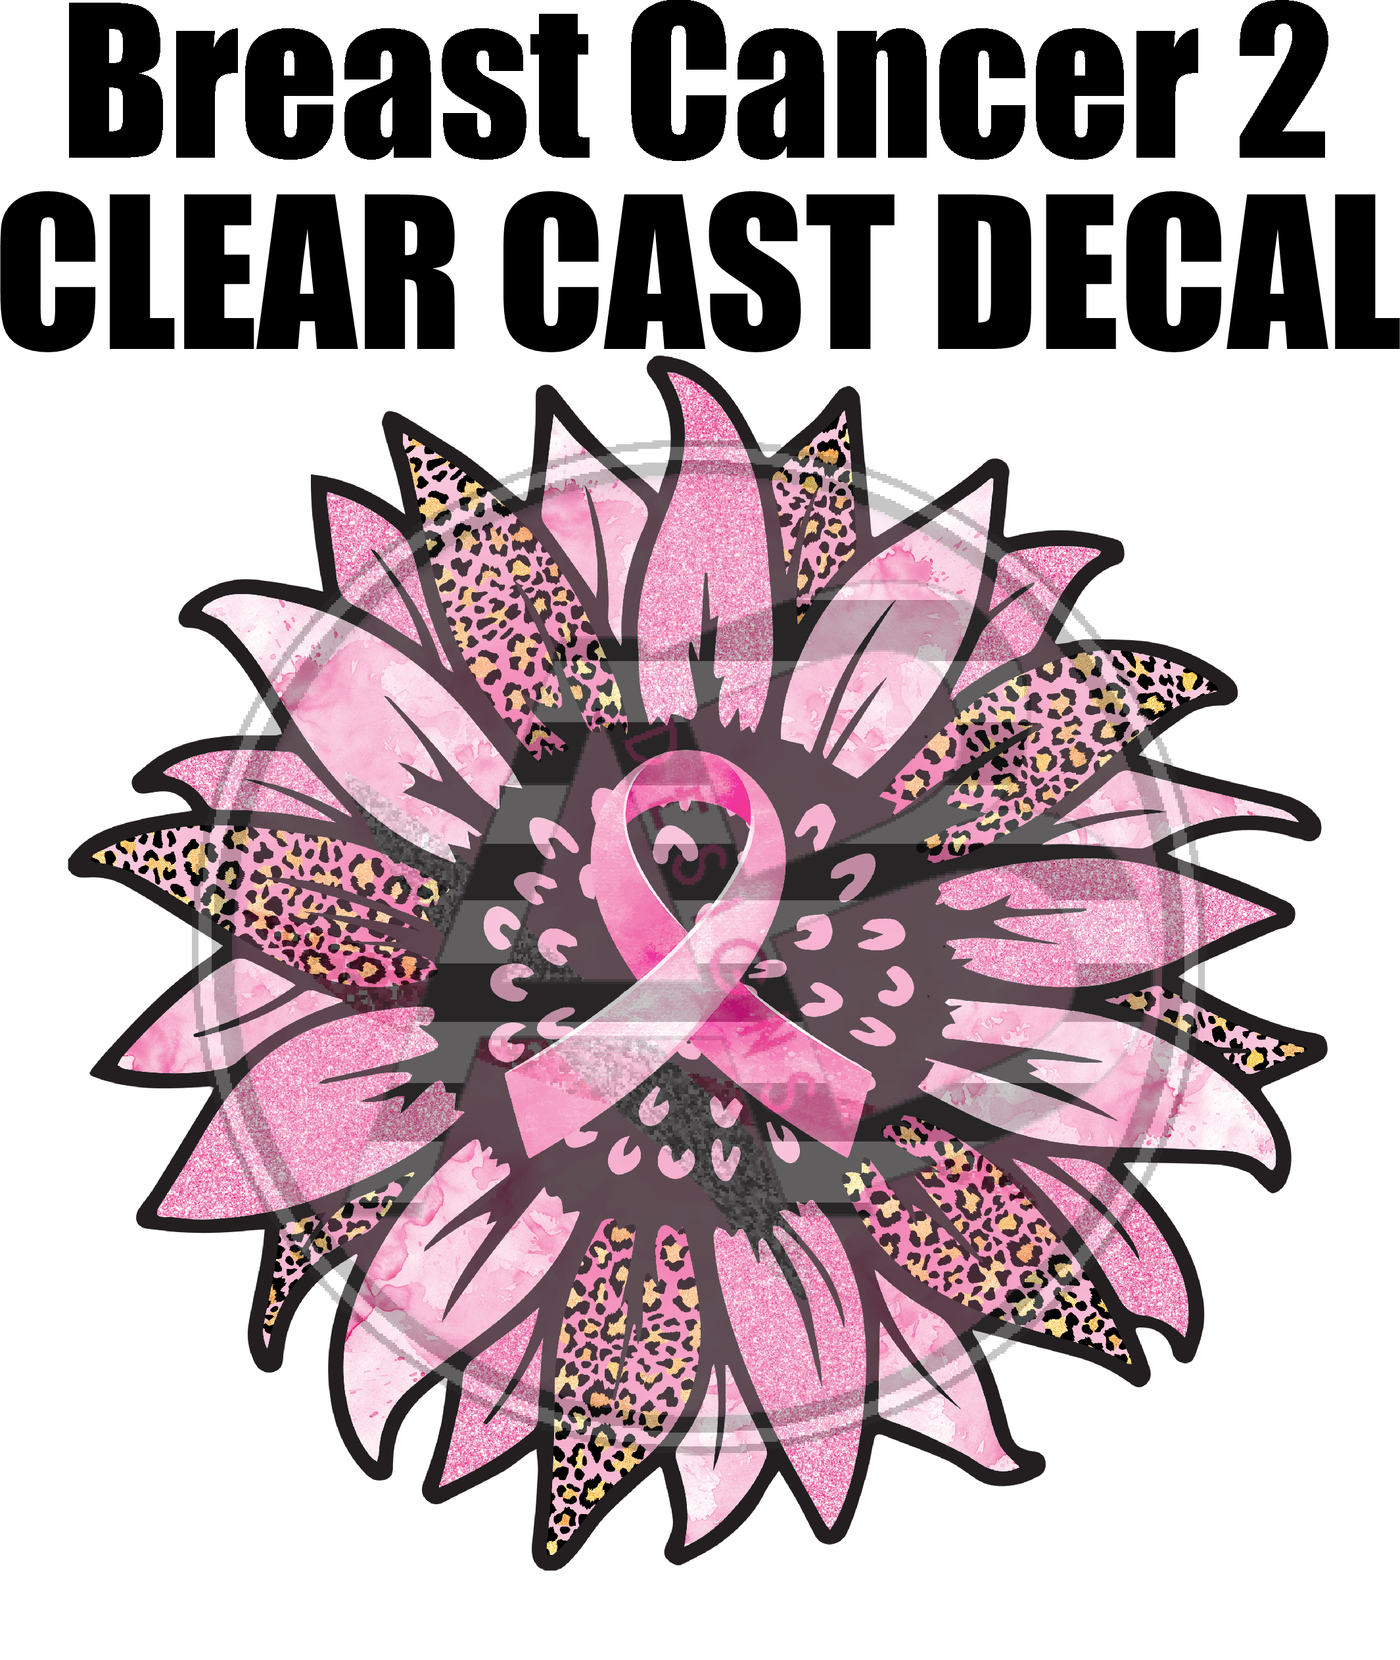 Breast Cancer 2 - Clear Cast Decal